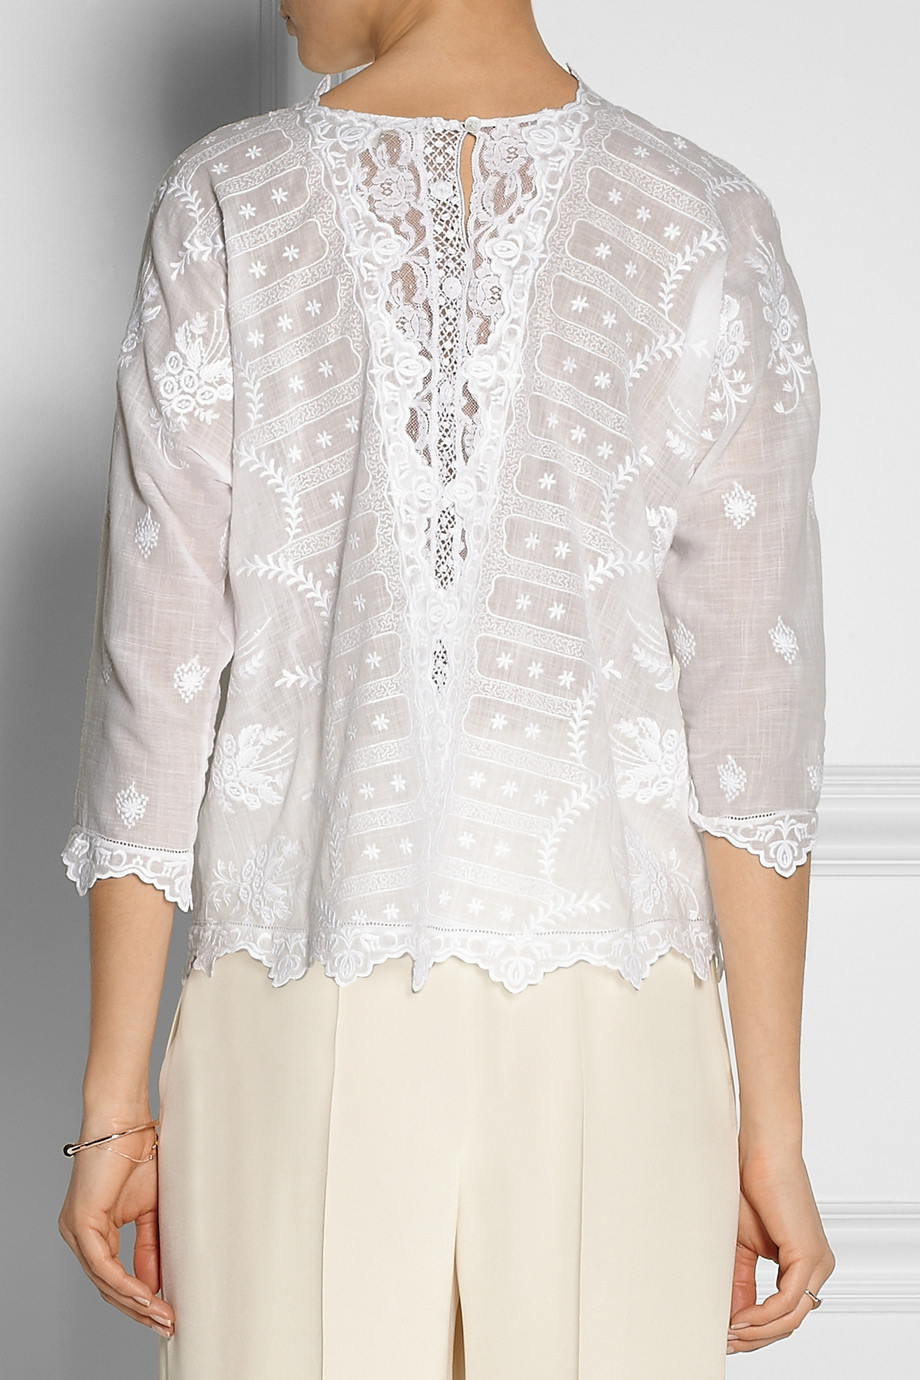 Vanessa Bruno Albane Embroidered Voile and Lace Top in White - Lyst